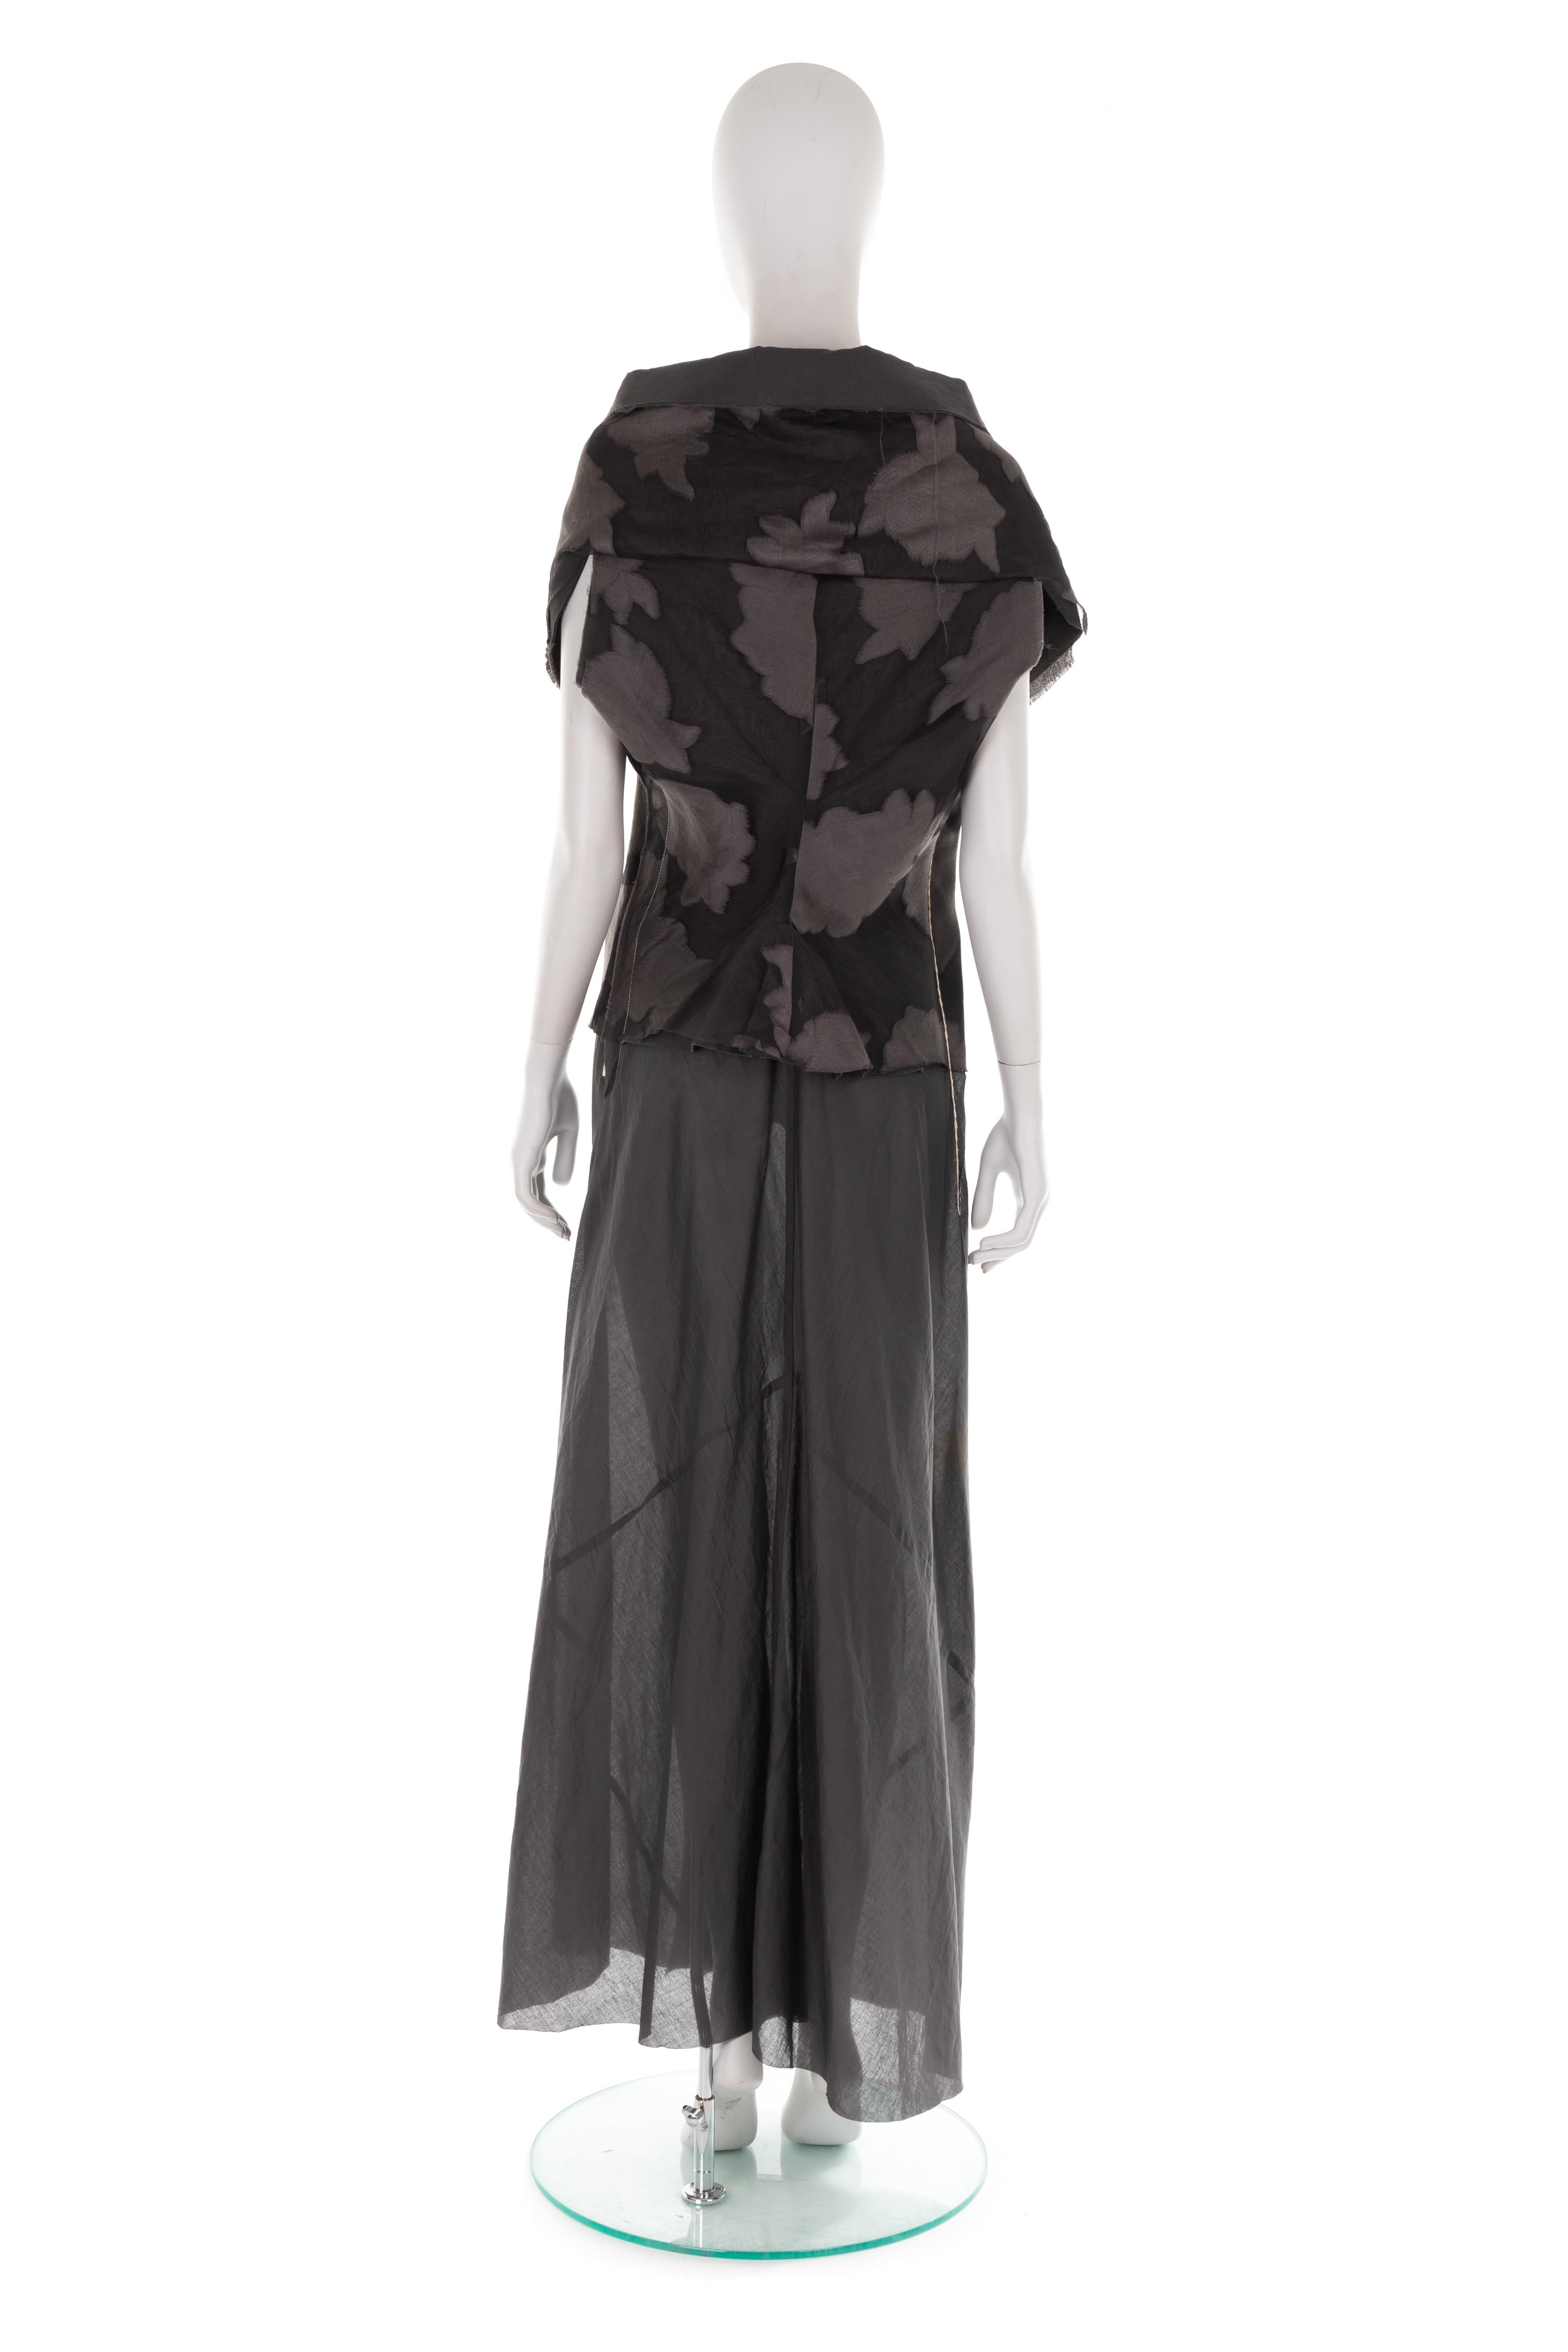 Comme Des Garçons S/S 1998 grey silk and poplin raw edge floral gown  For Sale 1